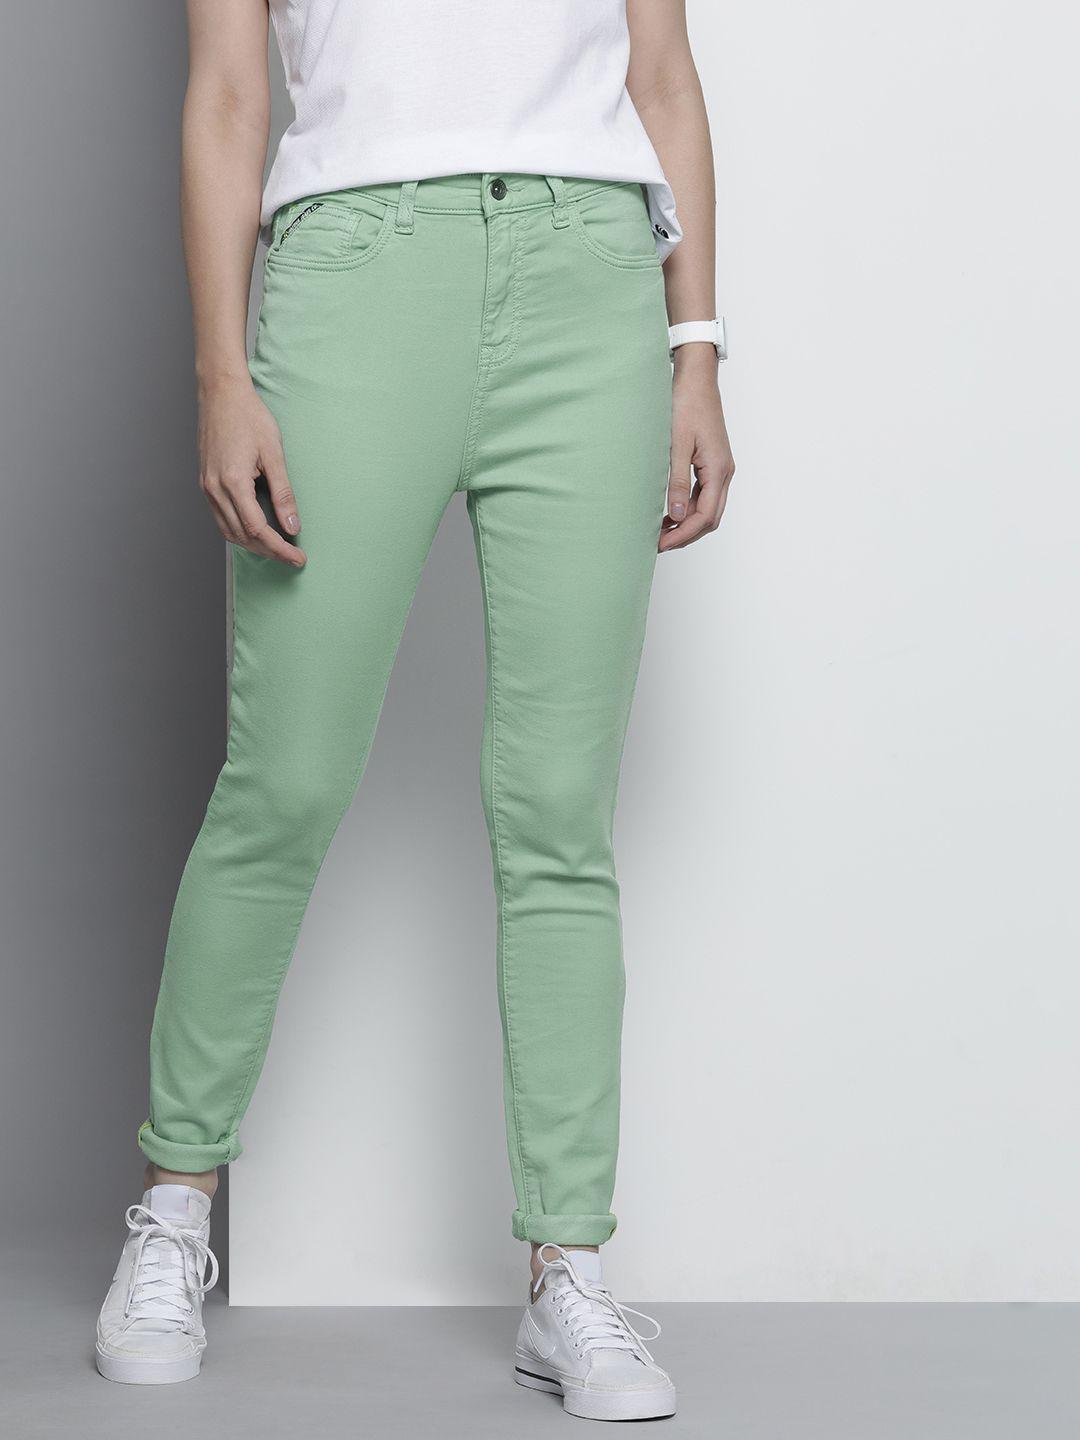 nautica women mint green skinny fit clean look stretchable jeans